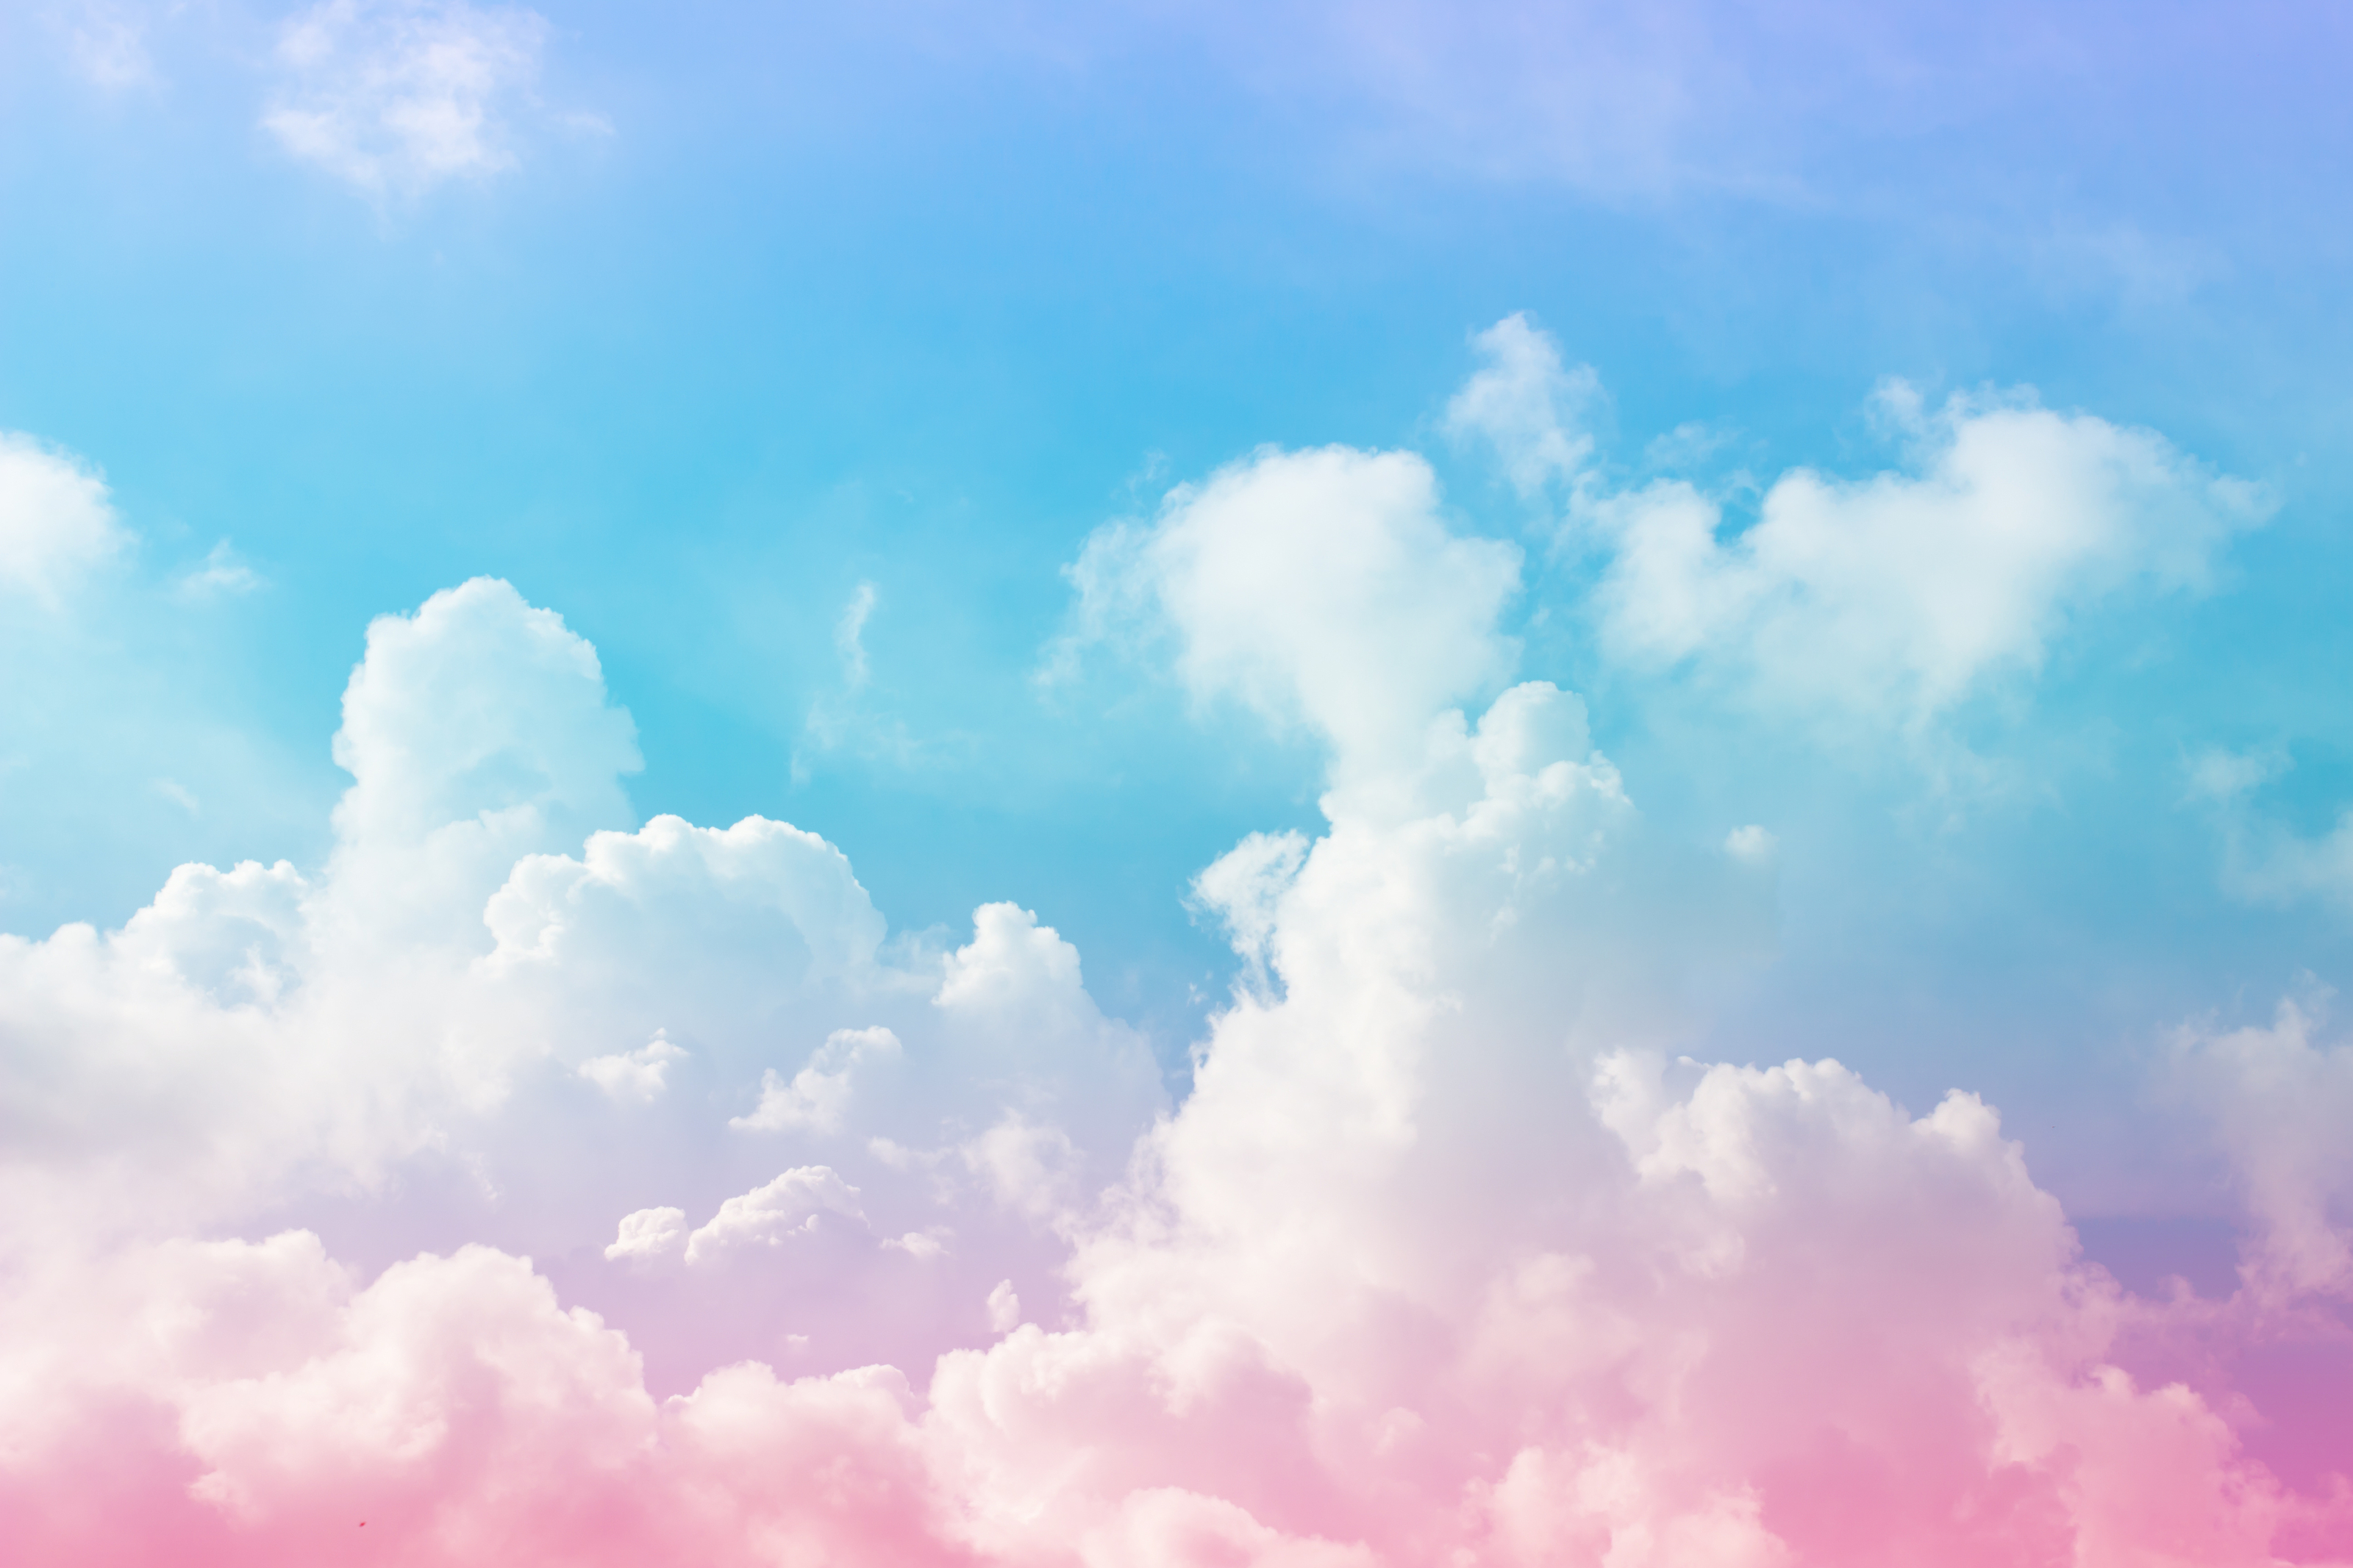 Pastel Candy Wallpapers - Wallpaper Cave